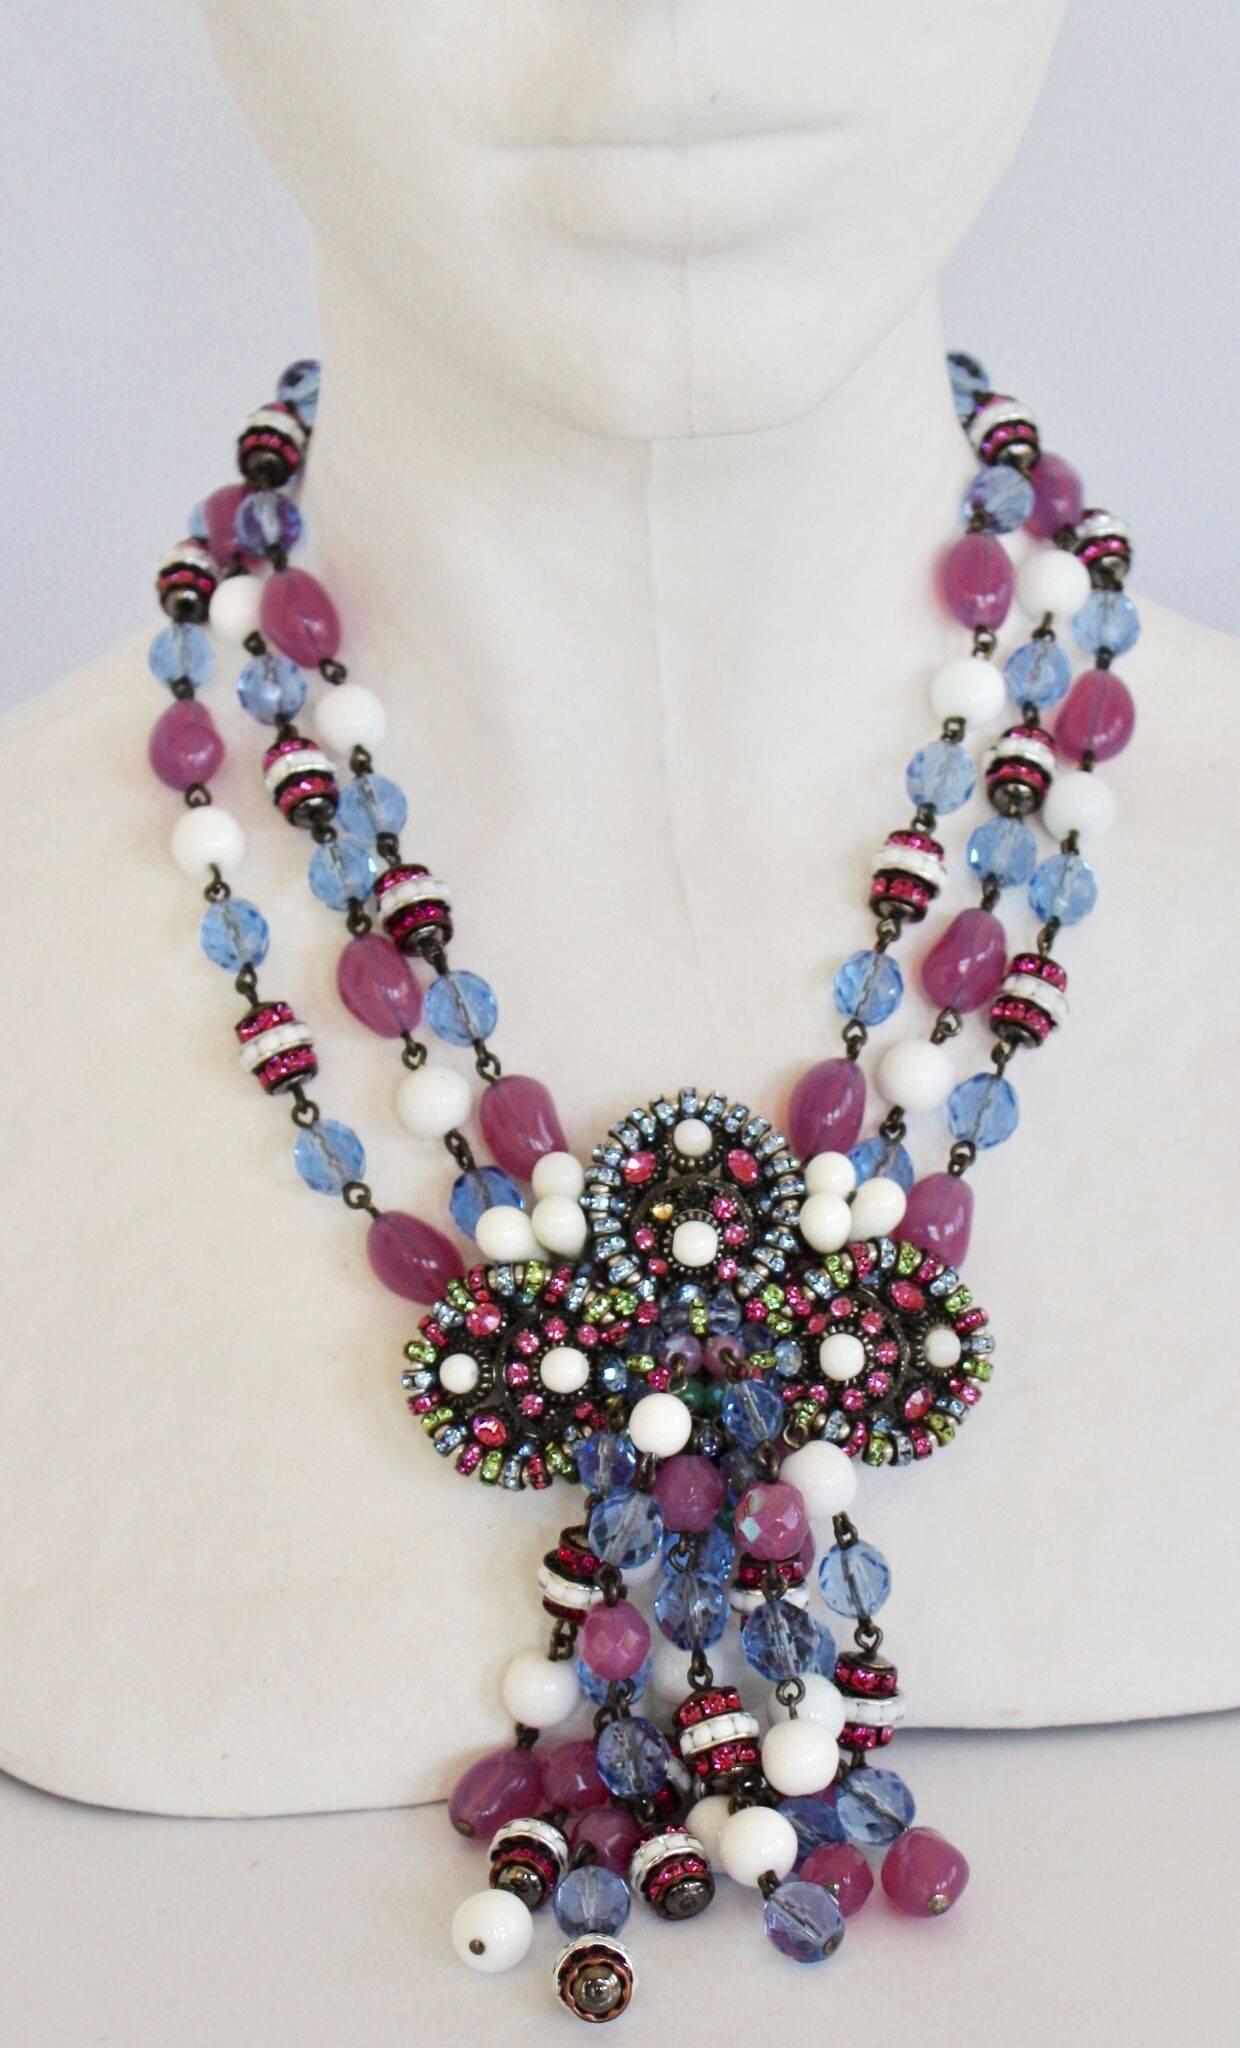 Handmade statement necklace from Francoise Montague. The center features a fabulous Swarovski crystal and glass bead floral shaped motif. 